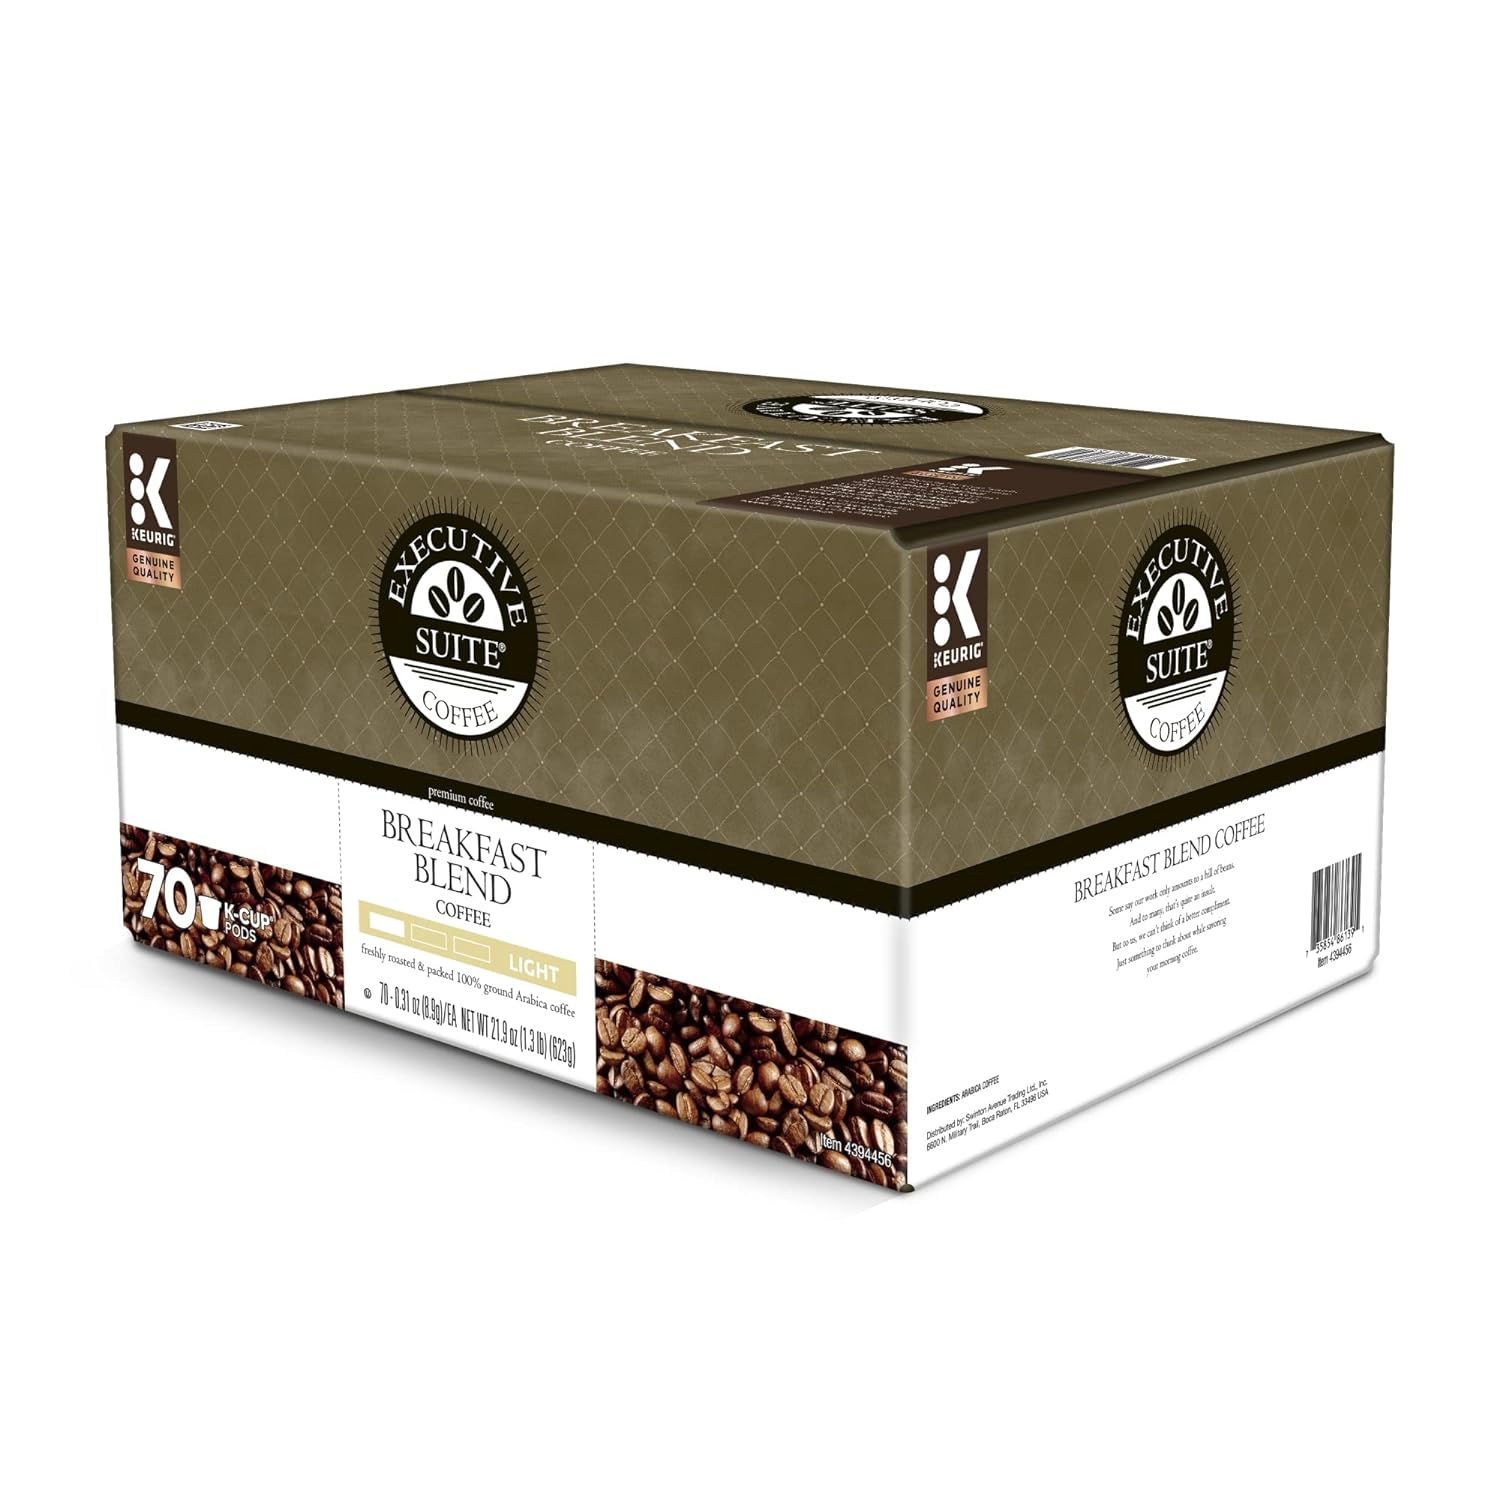 Executive Suite Breakfast Blend Coffee Keurig® K-Cup® Pods, Box of 70 Pods